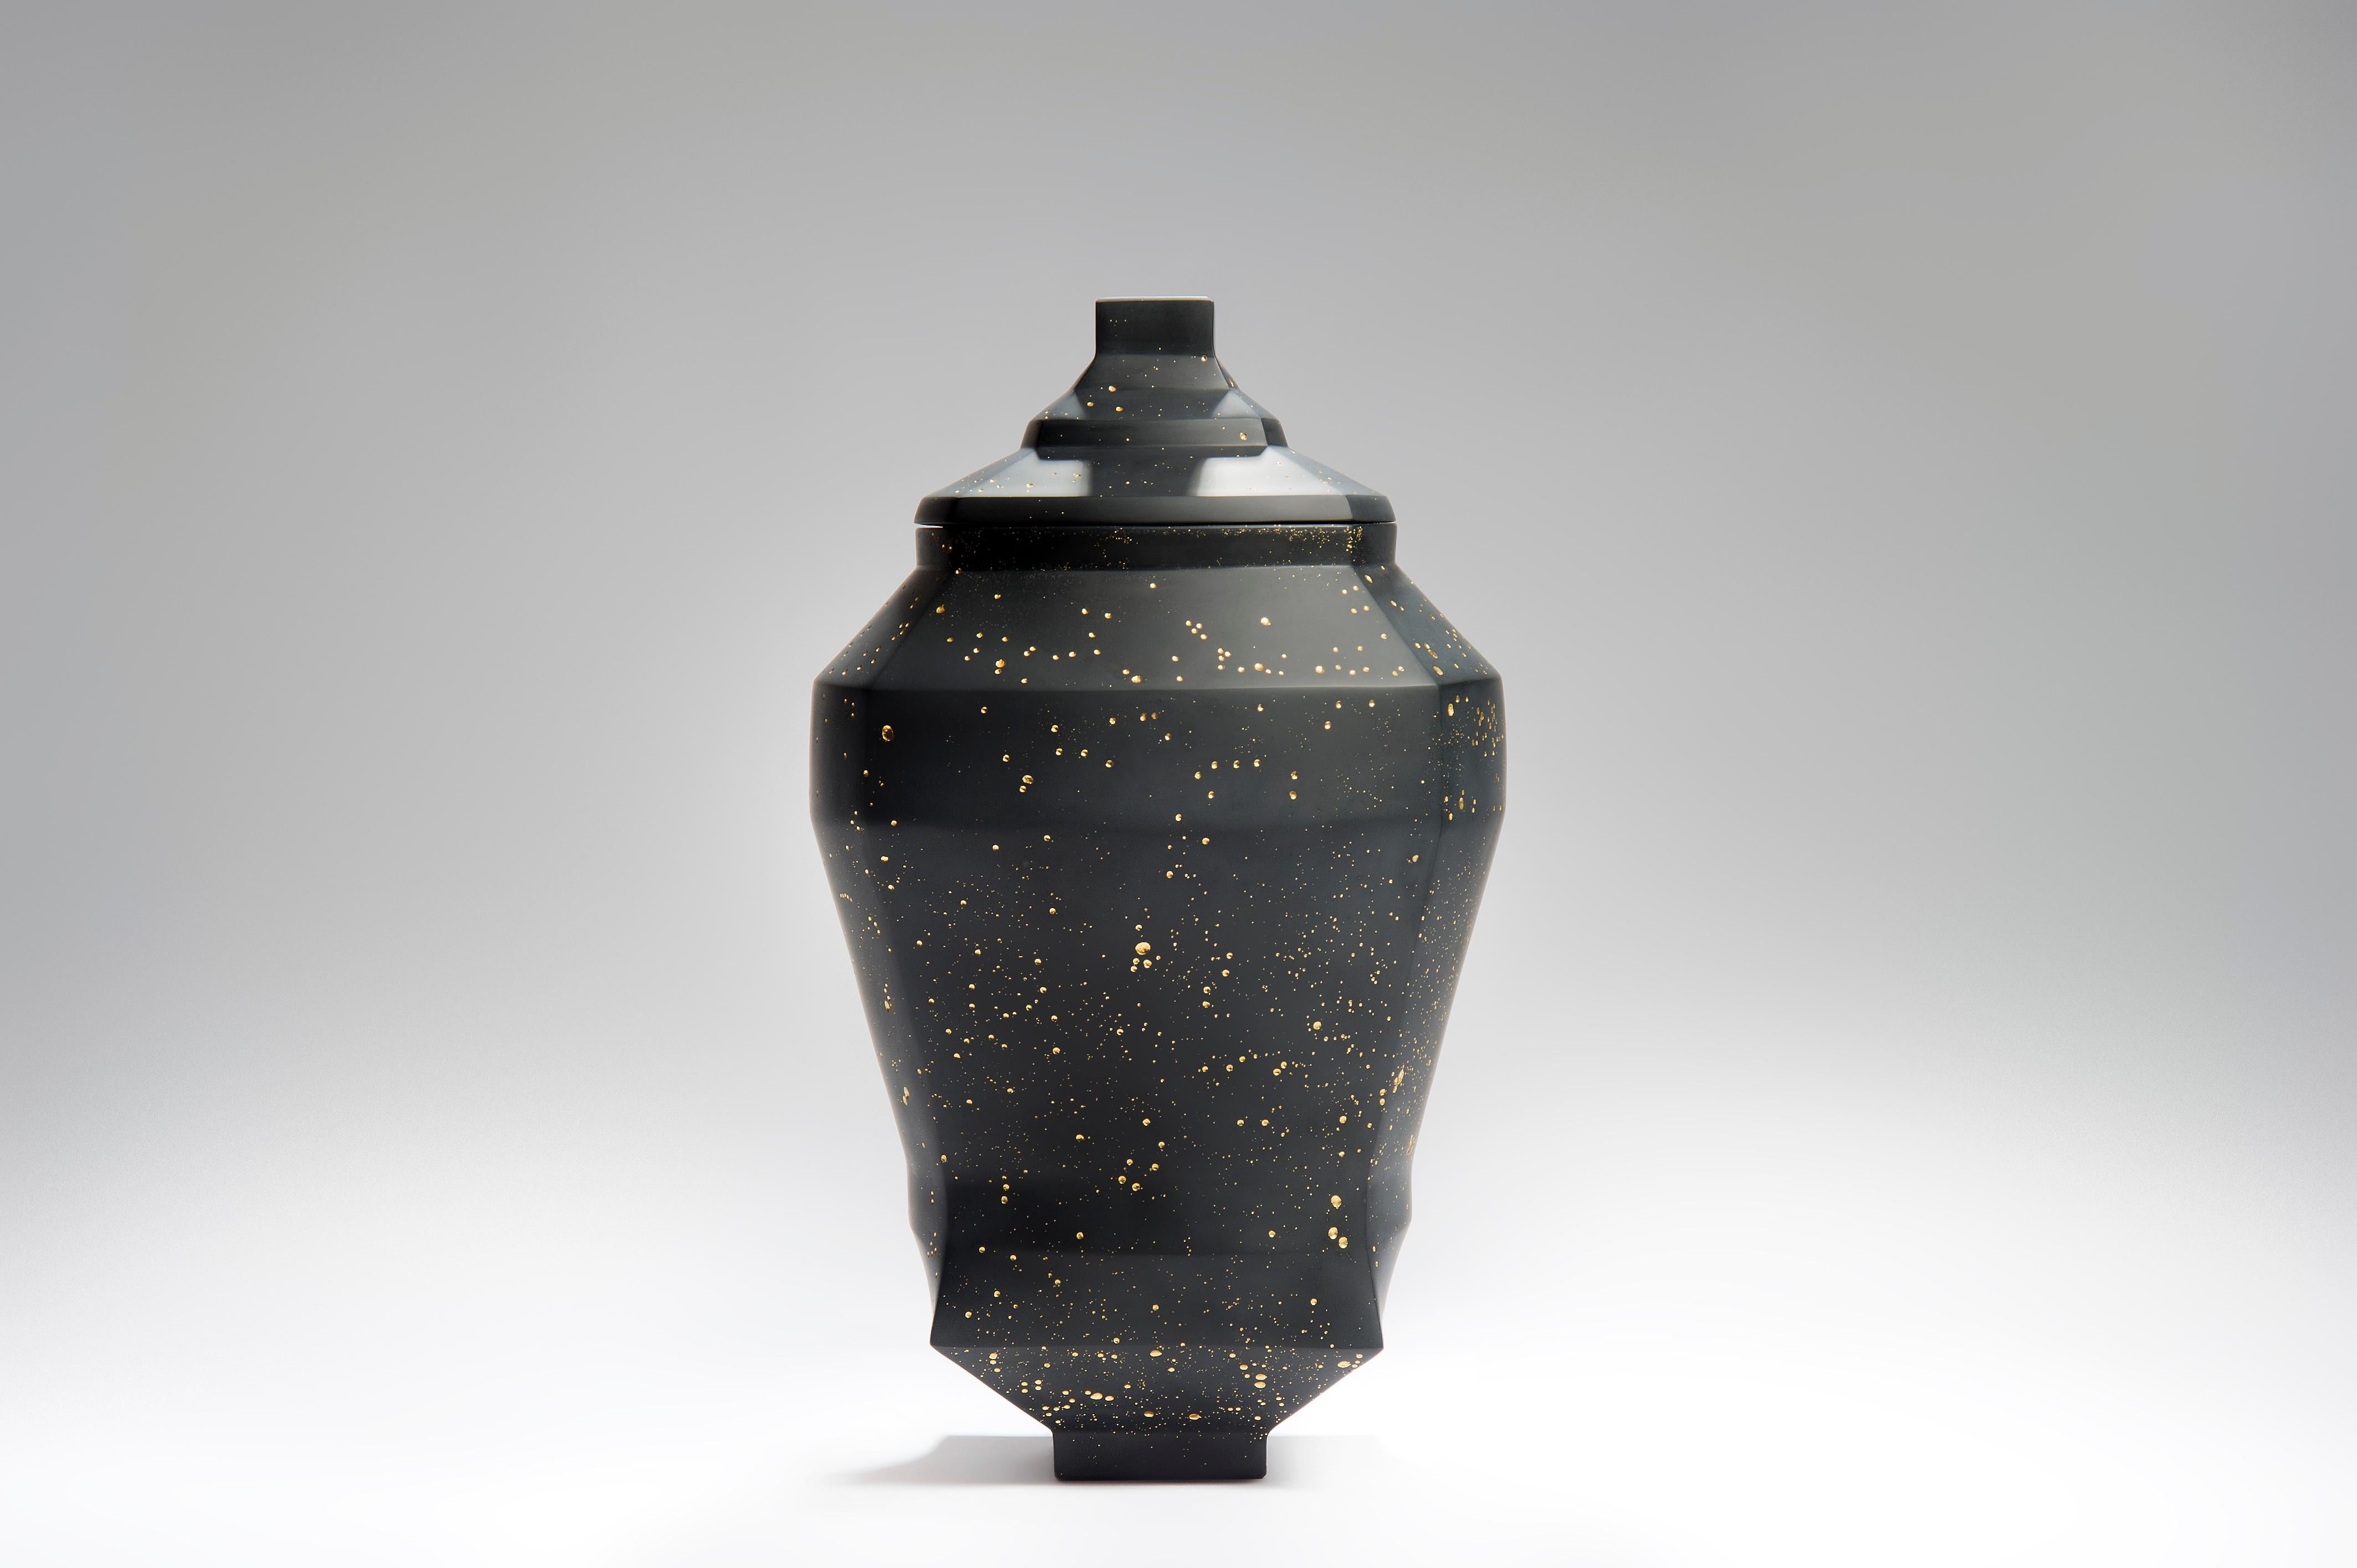 Organic Modern Daam Dah 9, a Unique Black Glass Lidded Box with Gold Detail by Choi Keeryong For Sale